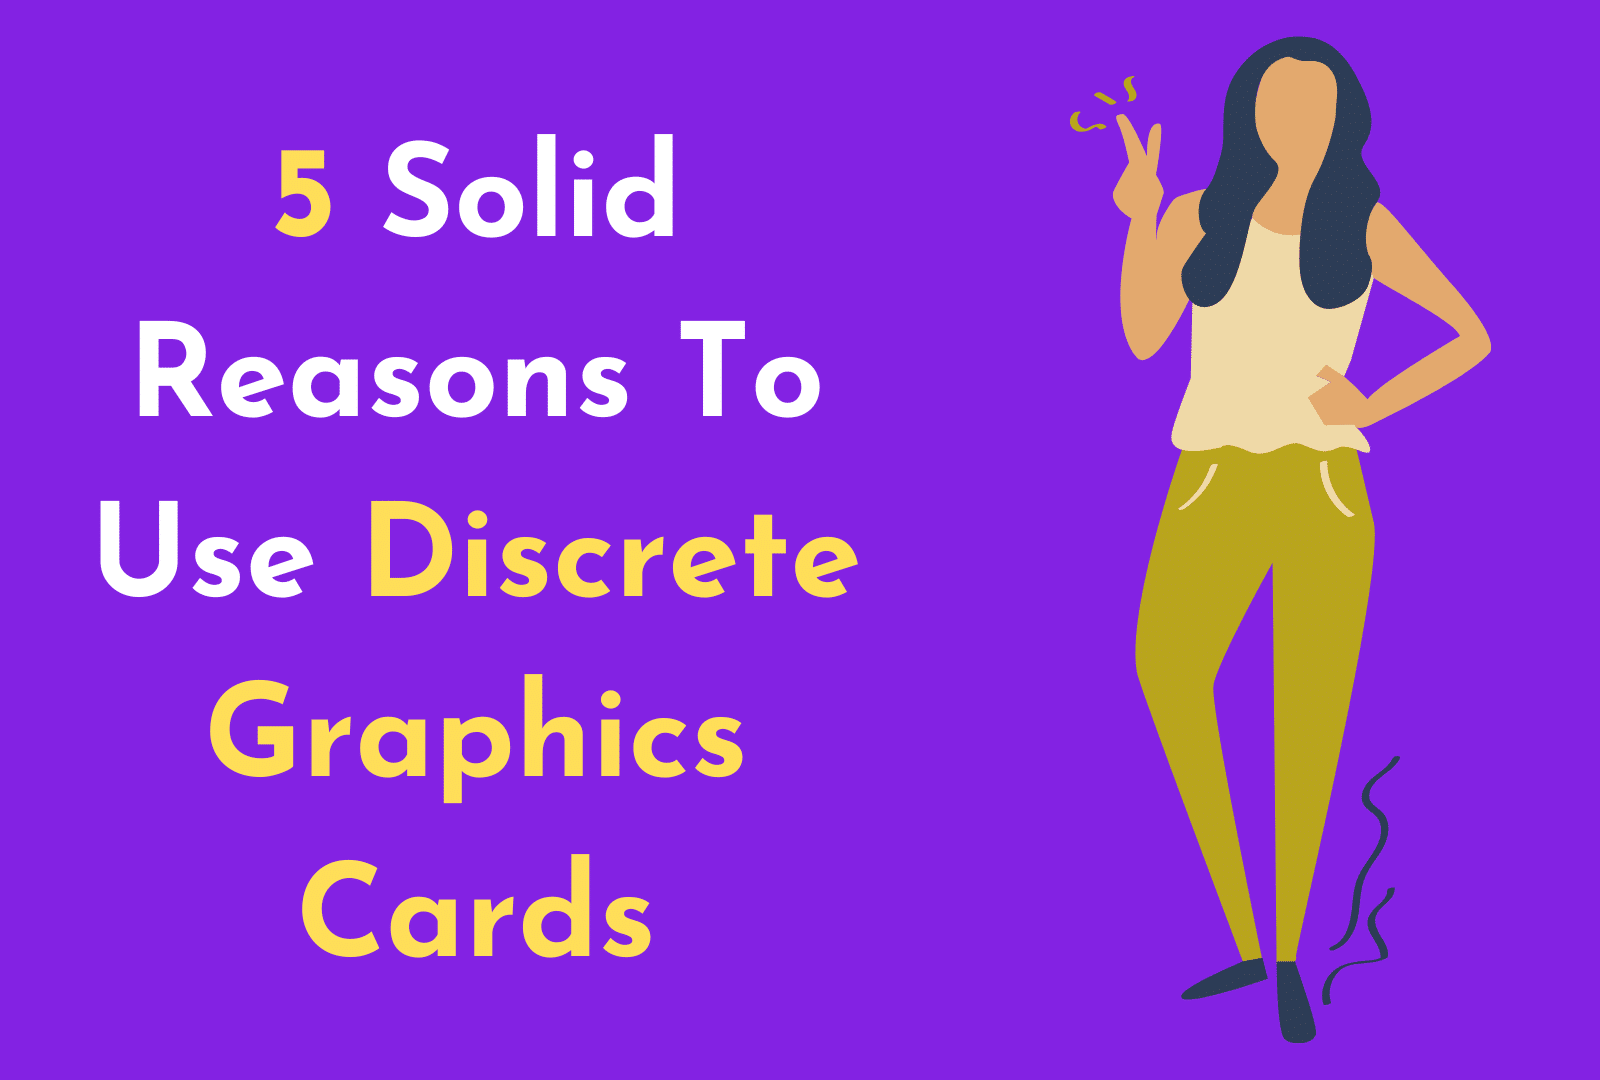 C:\Users\Mohsin\Downloads\5 Solid Reasons To Use Discrete Graphics Cards.png